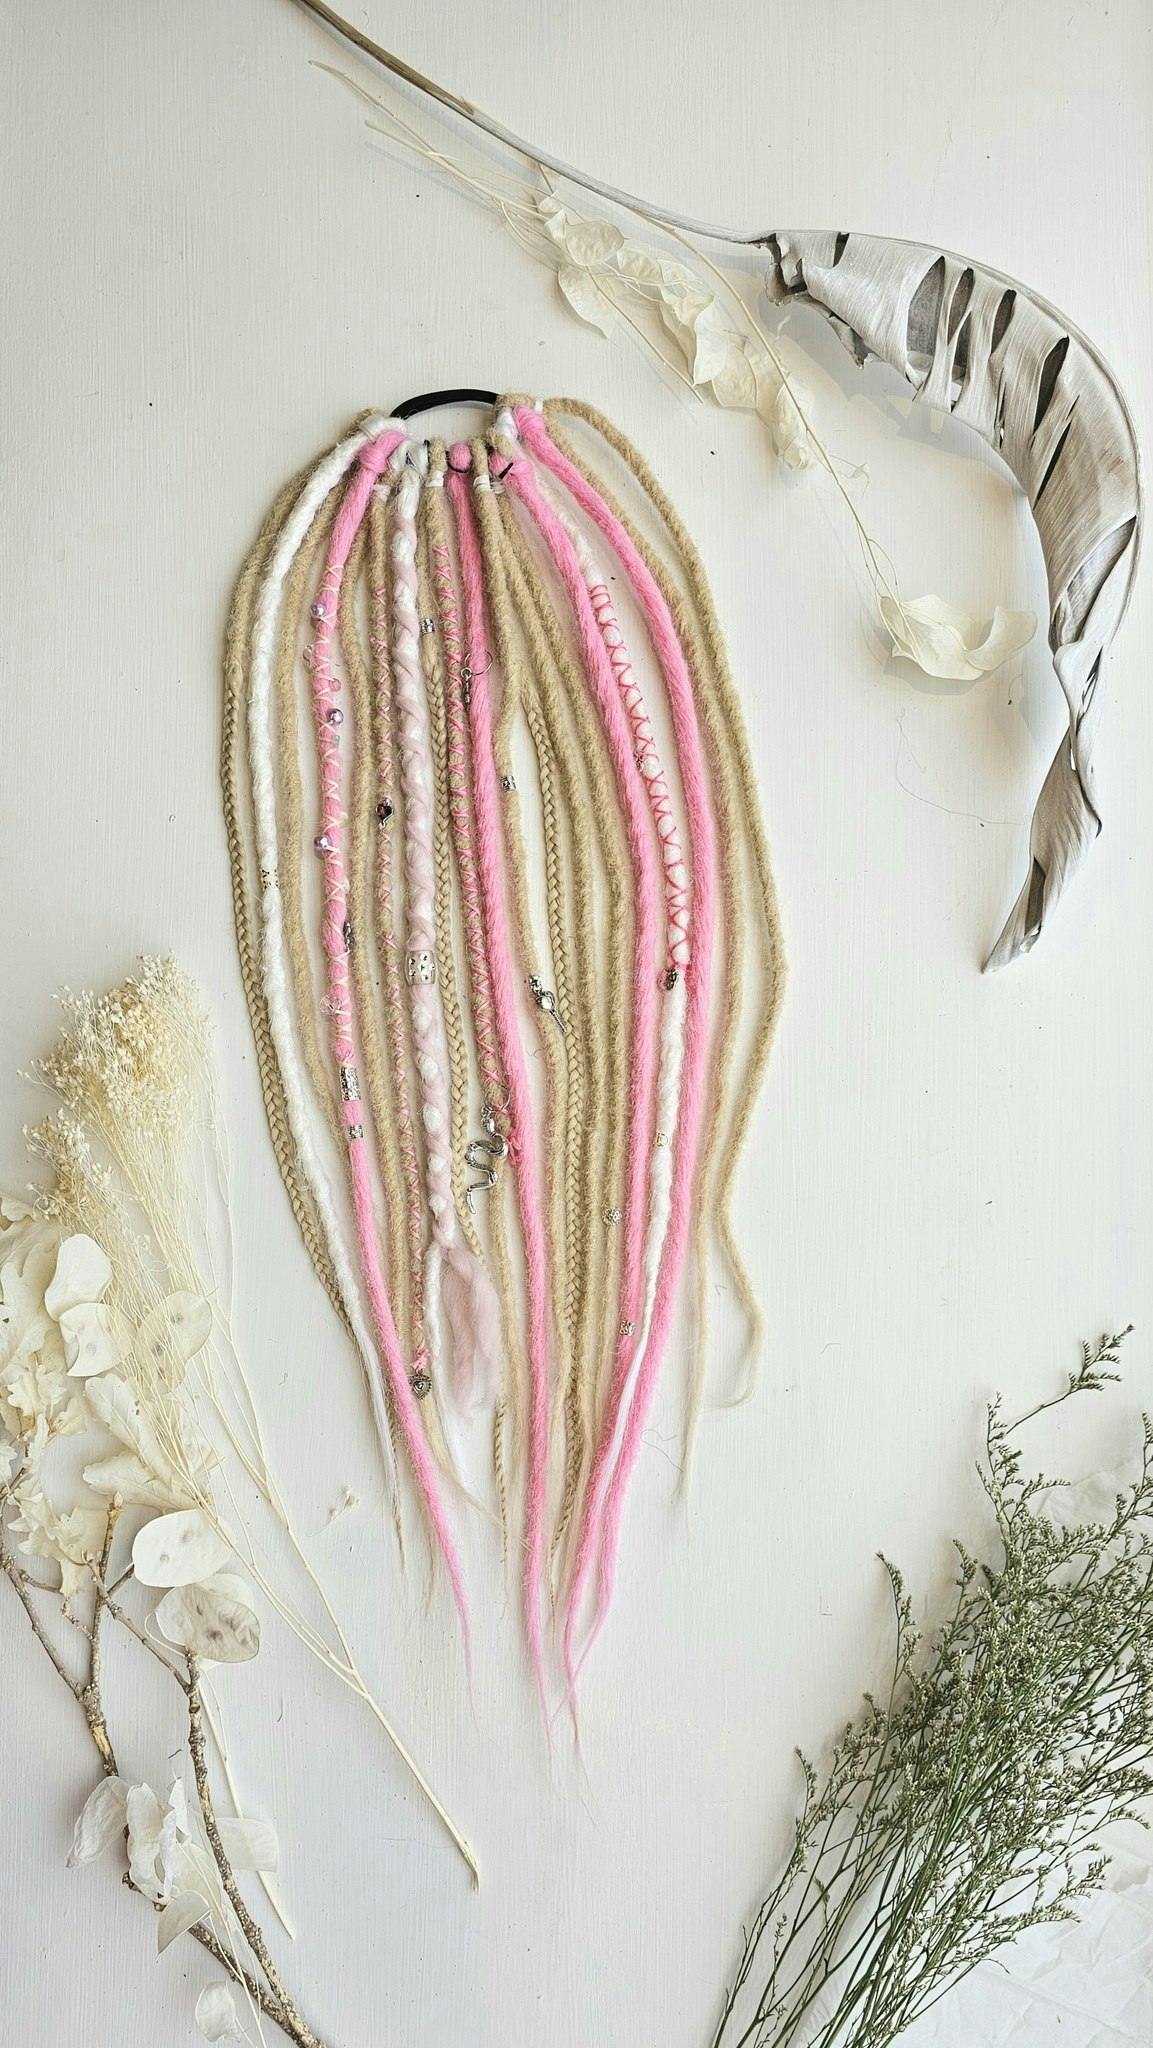 "Rosa Himmel" Dreads Ponytail Extensions